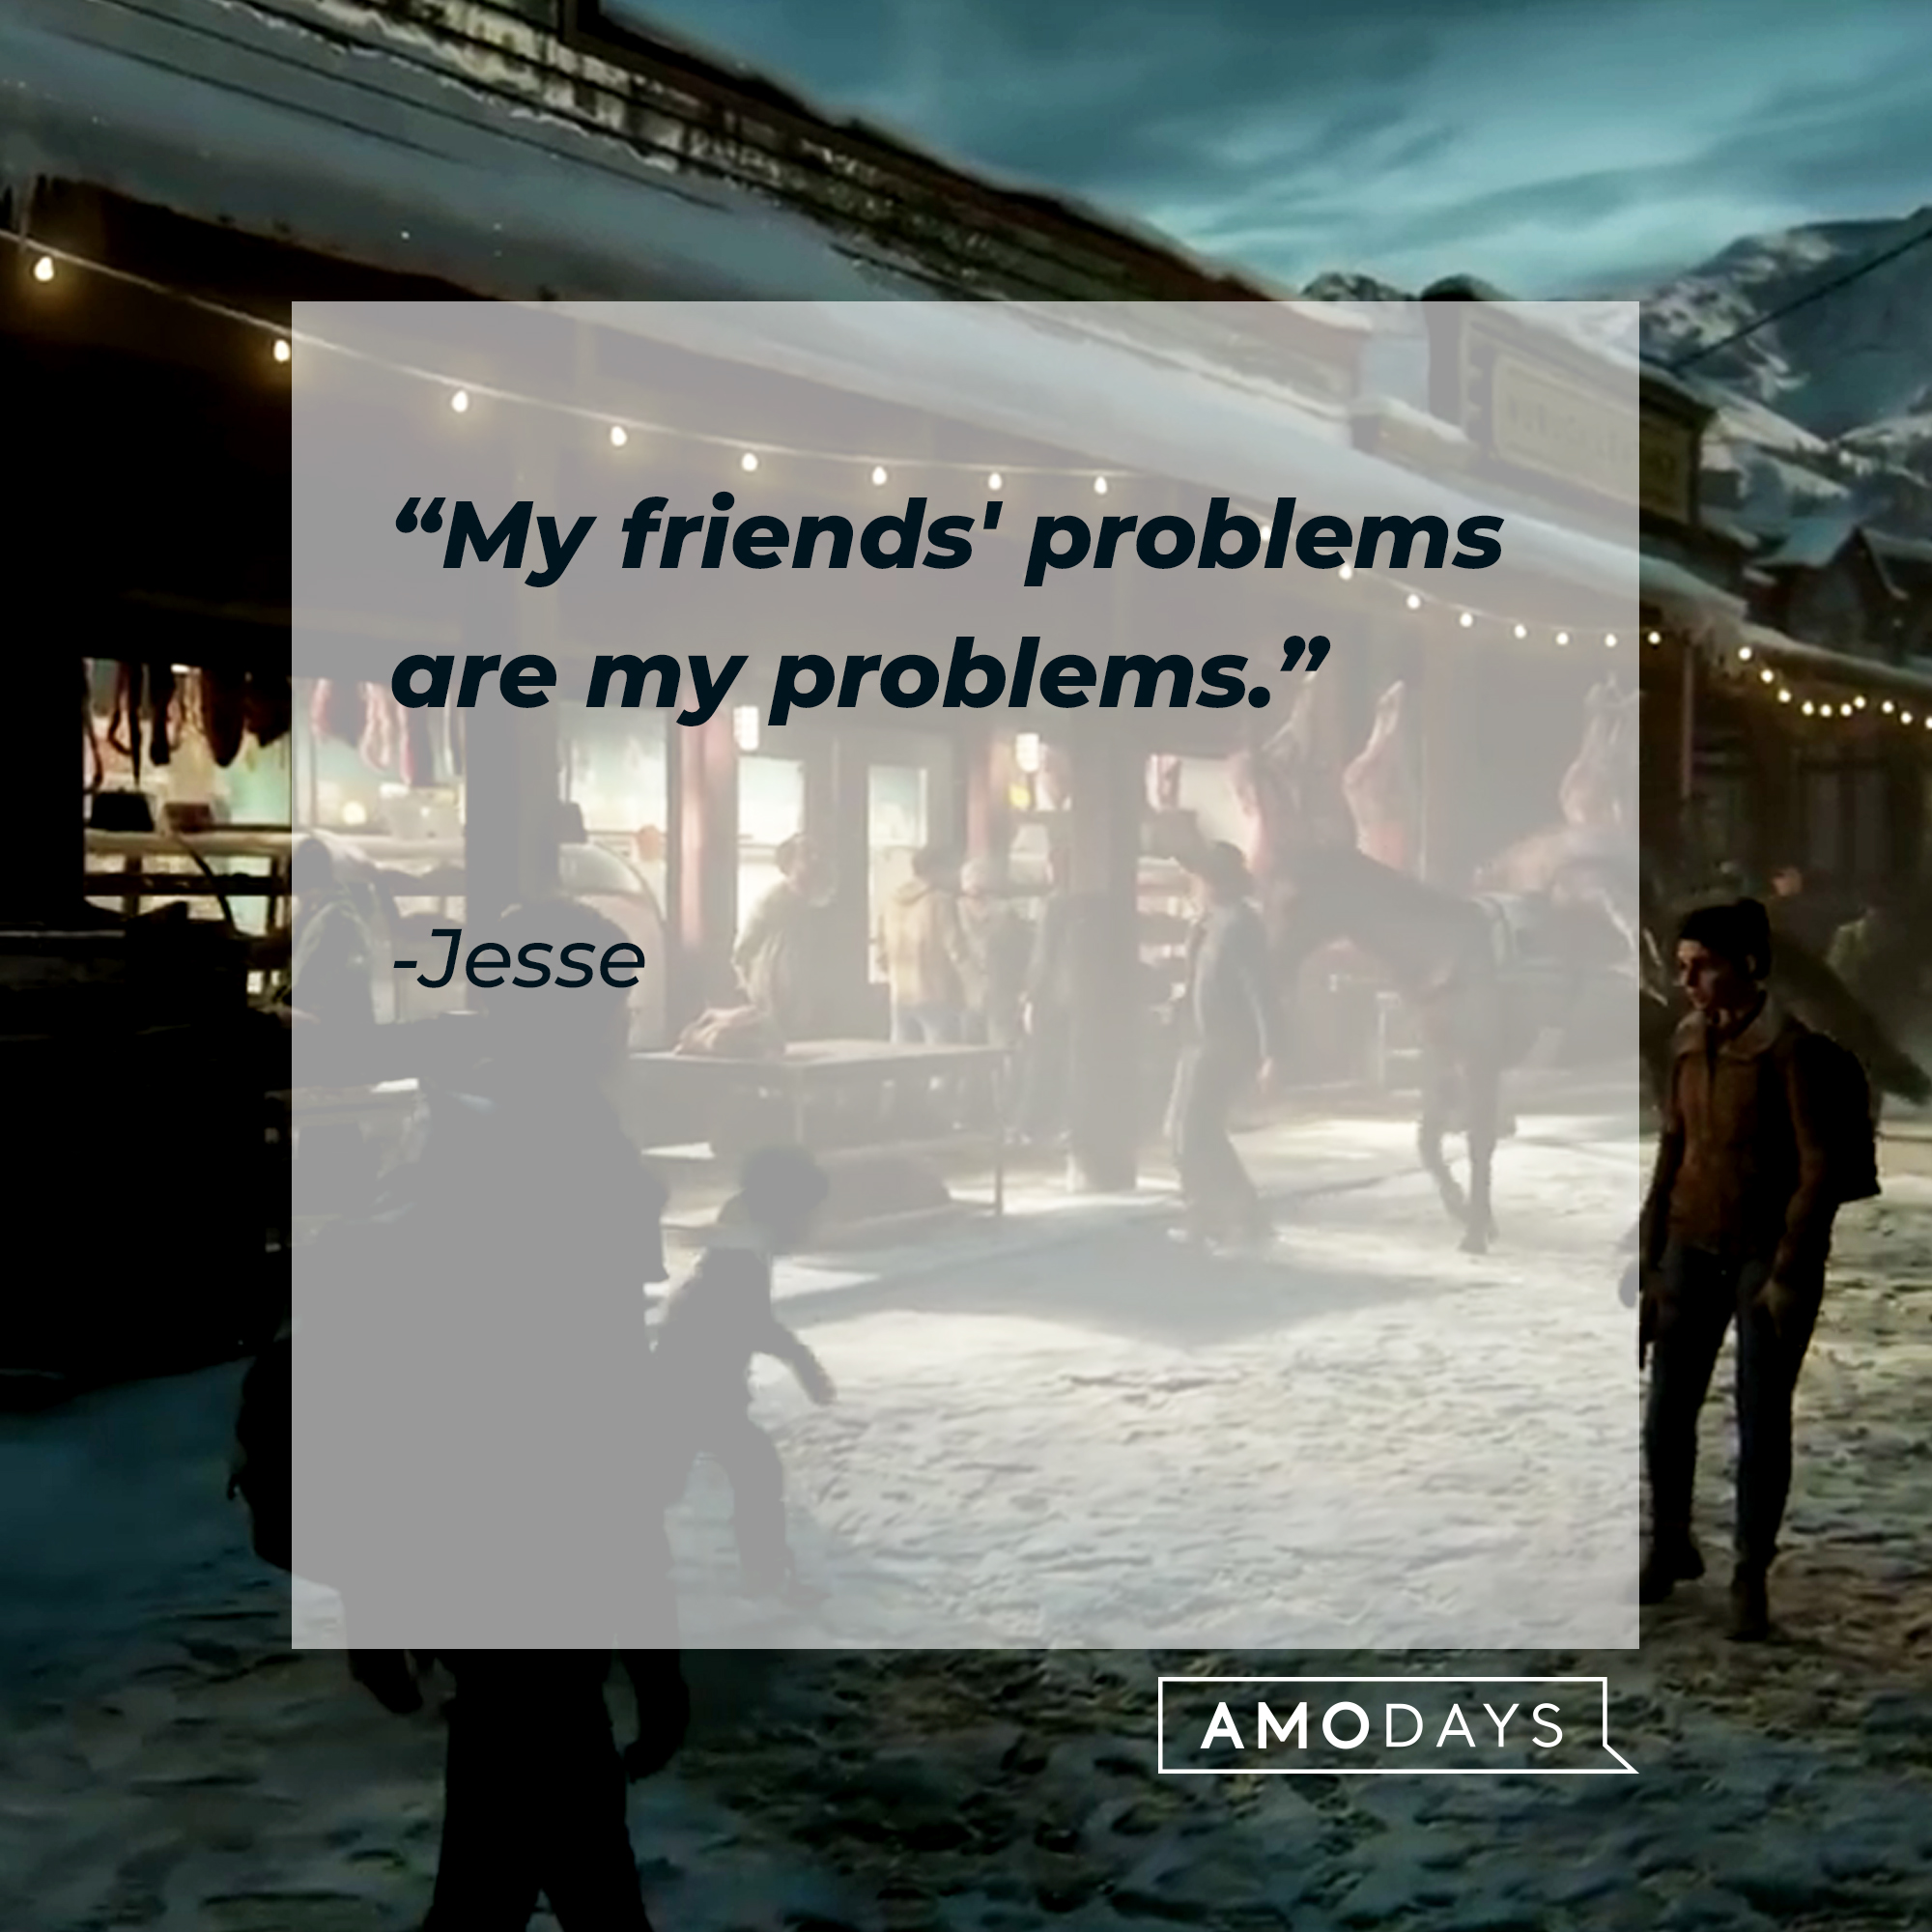 An image from “The Last of Us 2” with Jesse’s quote: "My friends' problems are my problems." | Source: Facebook.com/TLOUPS